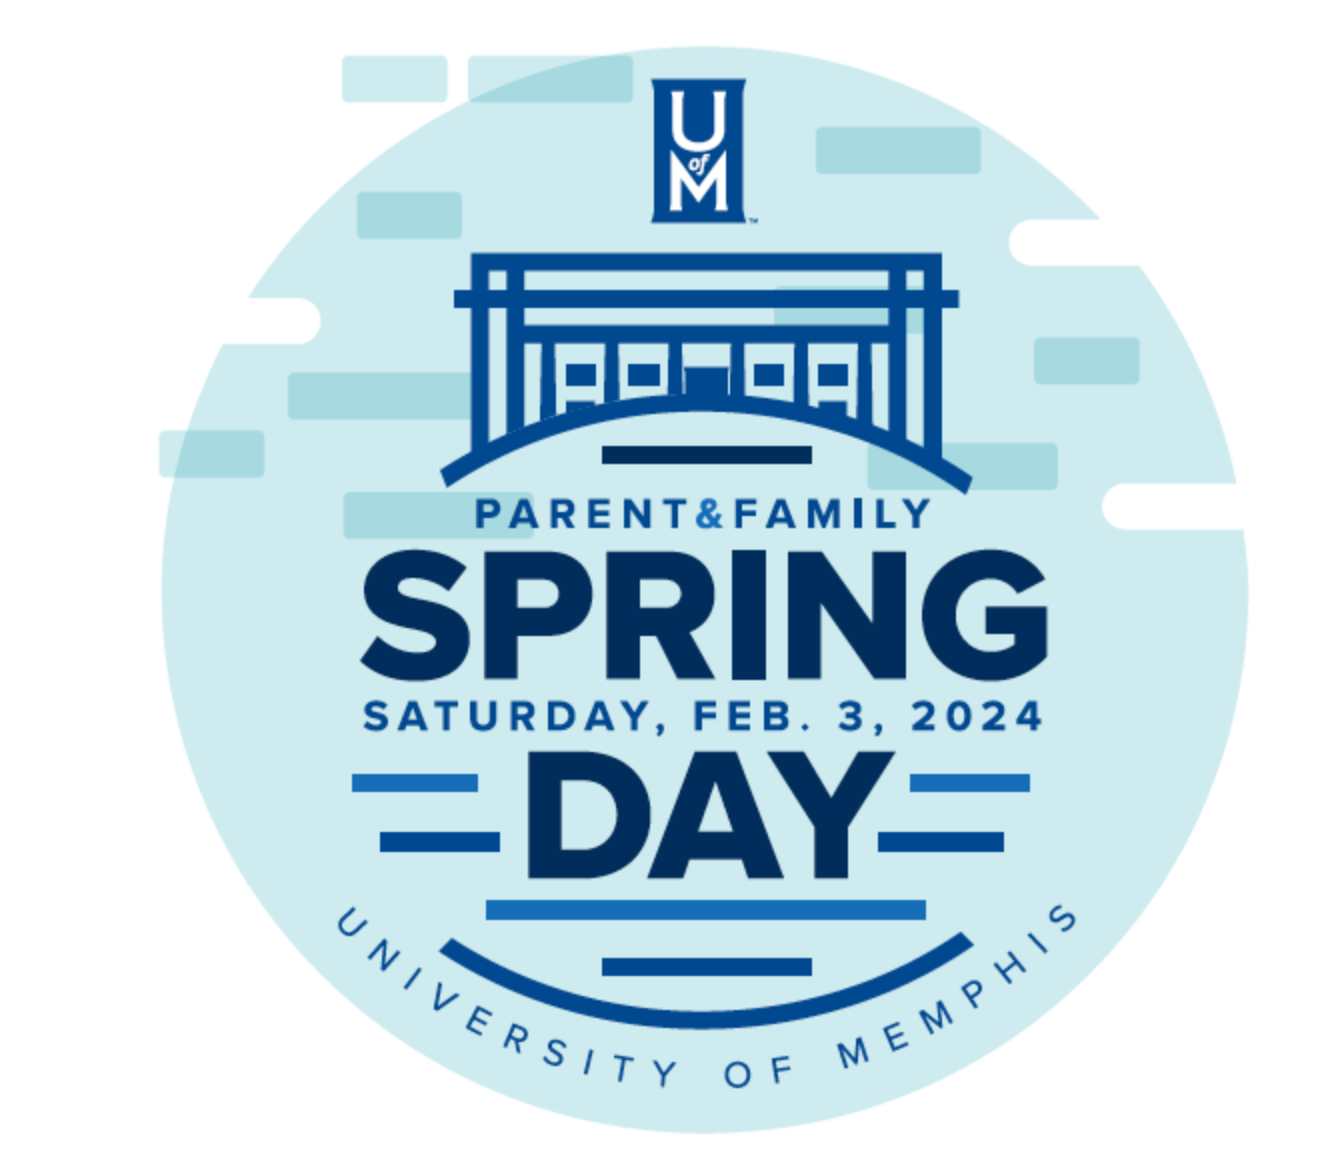 UofM Parent and Family Spring Day